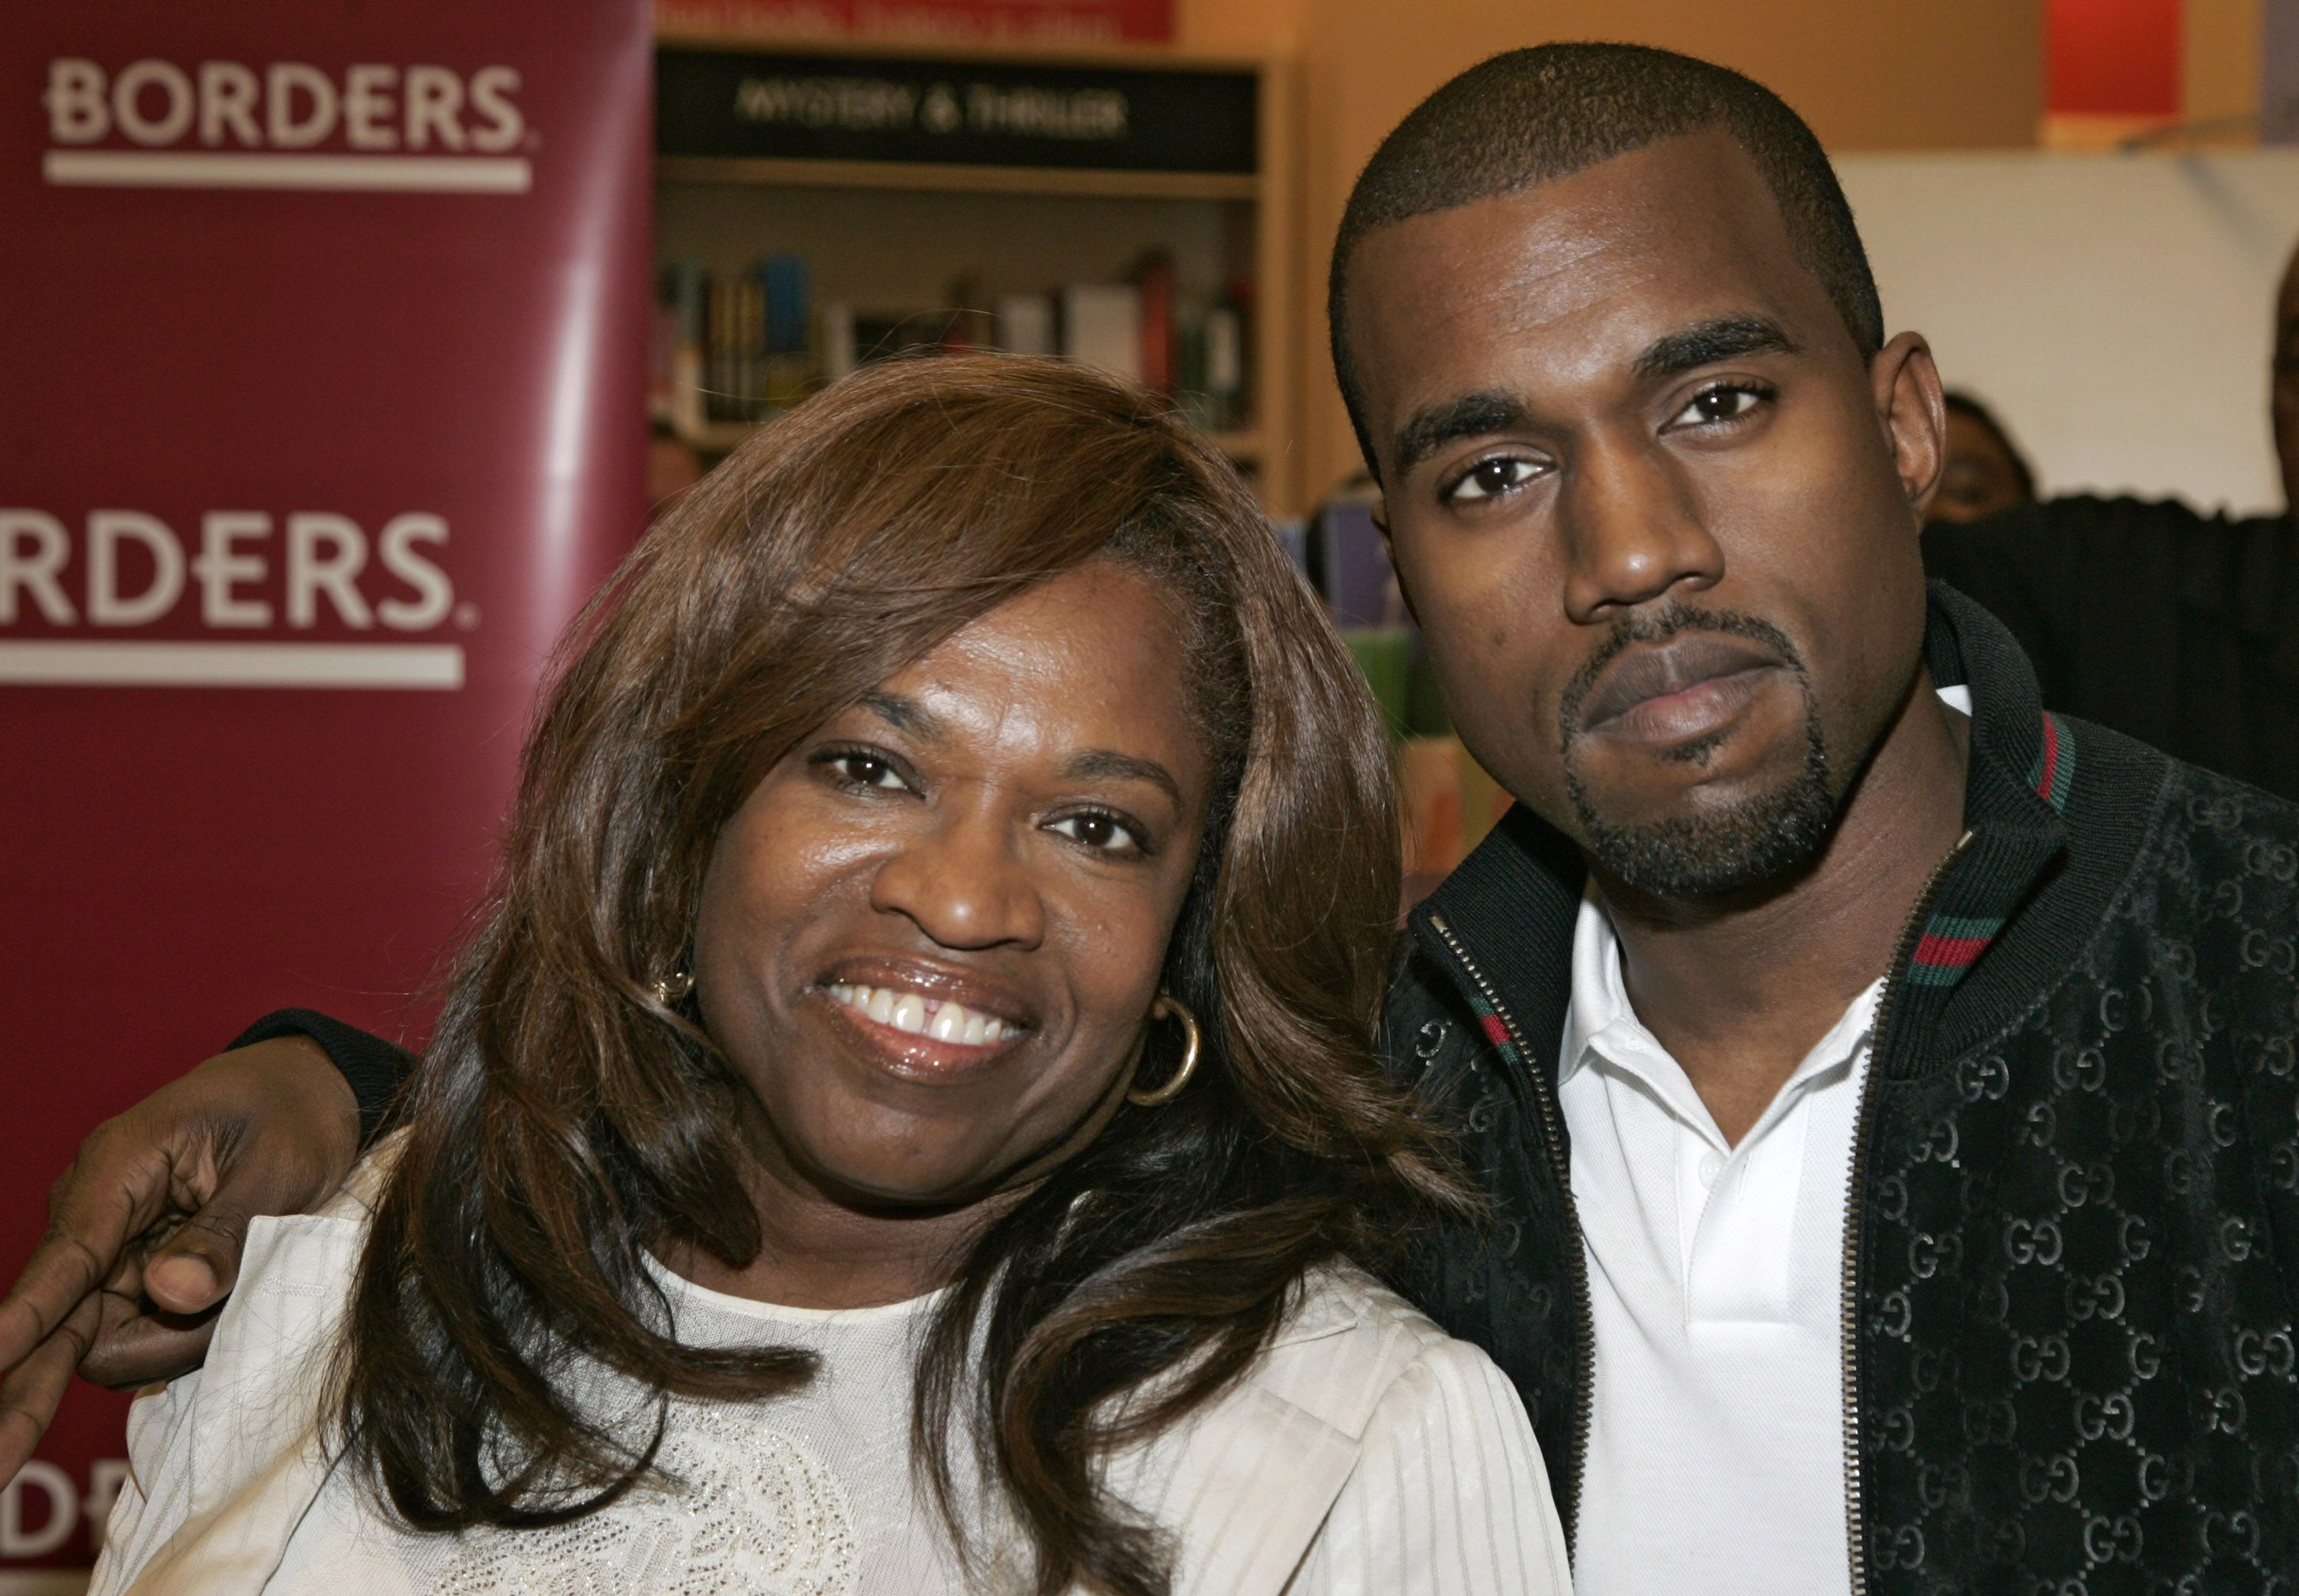 Donda West at a book signing for "Raising Kanye" with son Kanye West in June 2007 | Source: Getty Images